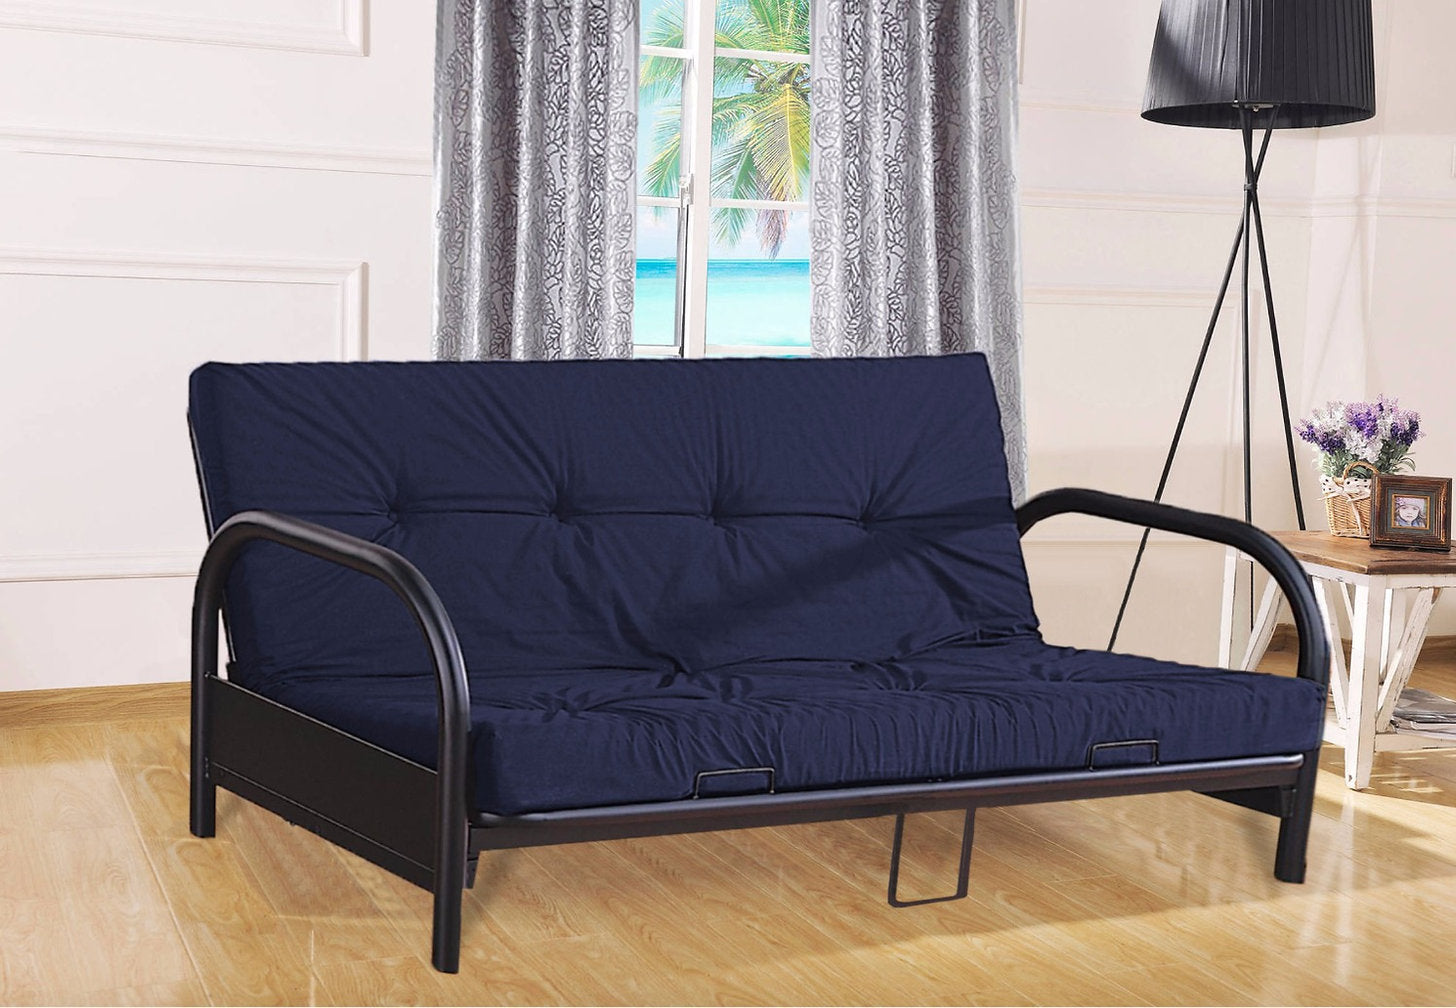 IF-208 - METAL FUTON FRAME ONLY IN BLACK BY INTERNATIONAL FURNITURE INC